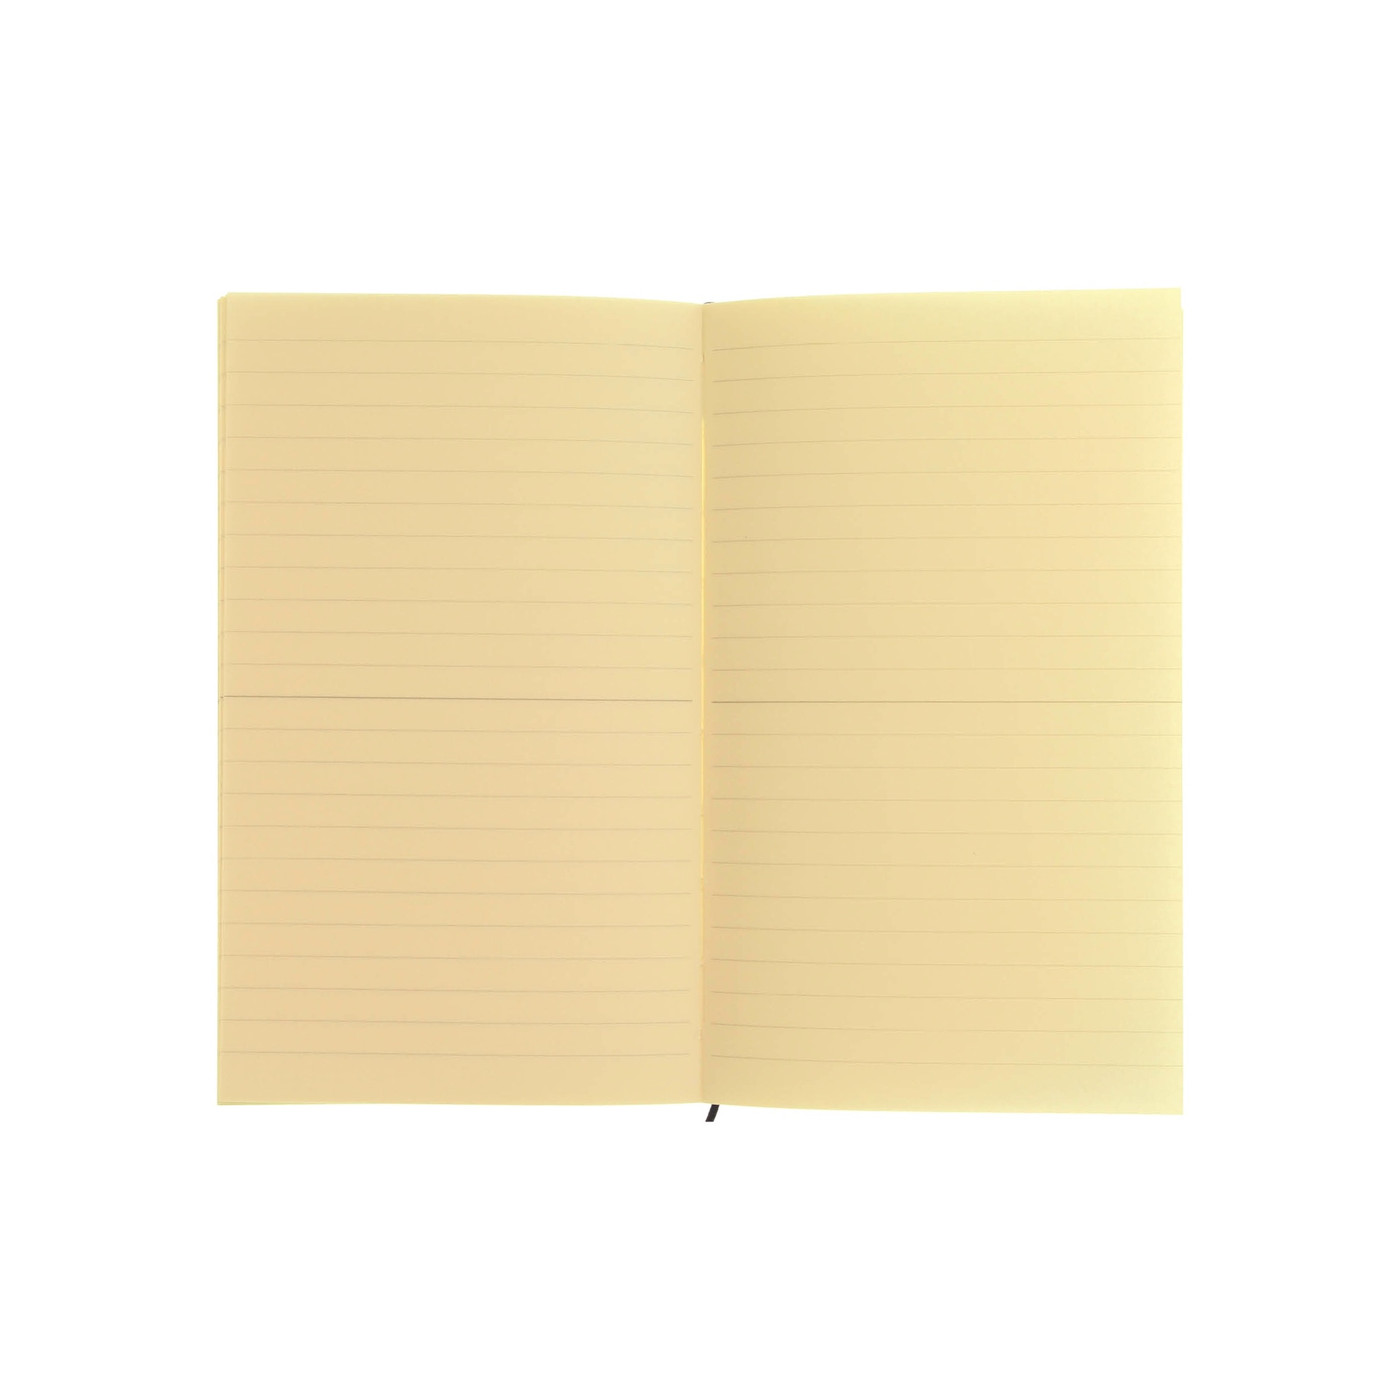 MD Paper notebook - B6 slim - LINED